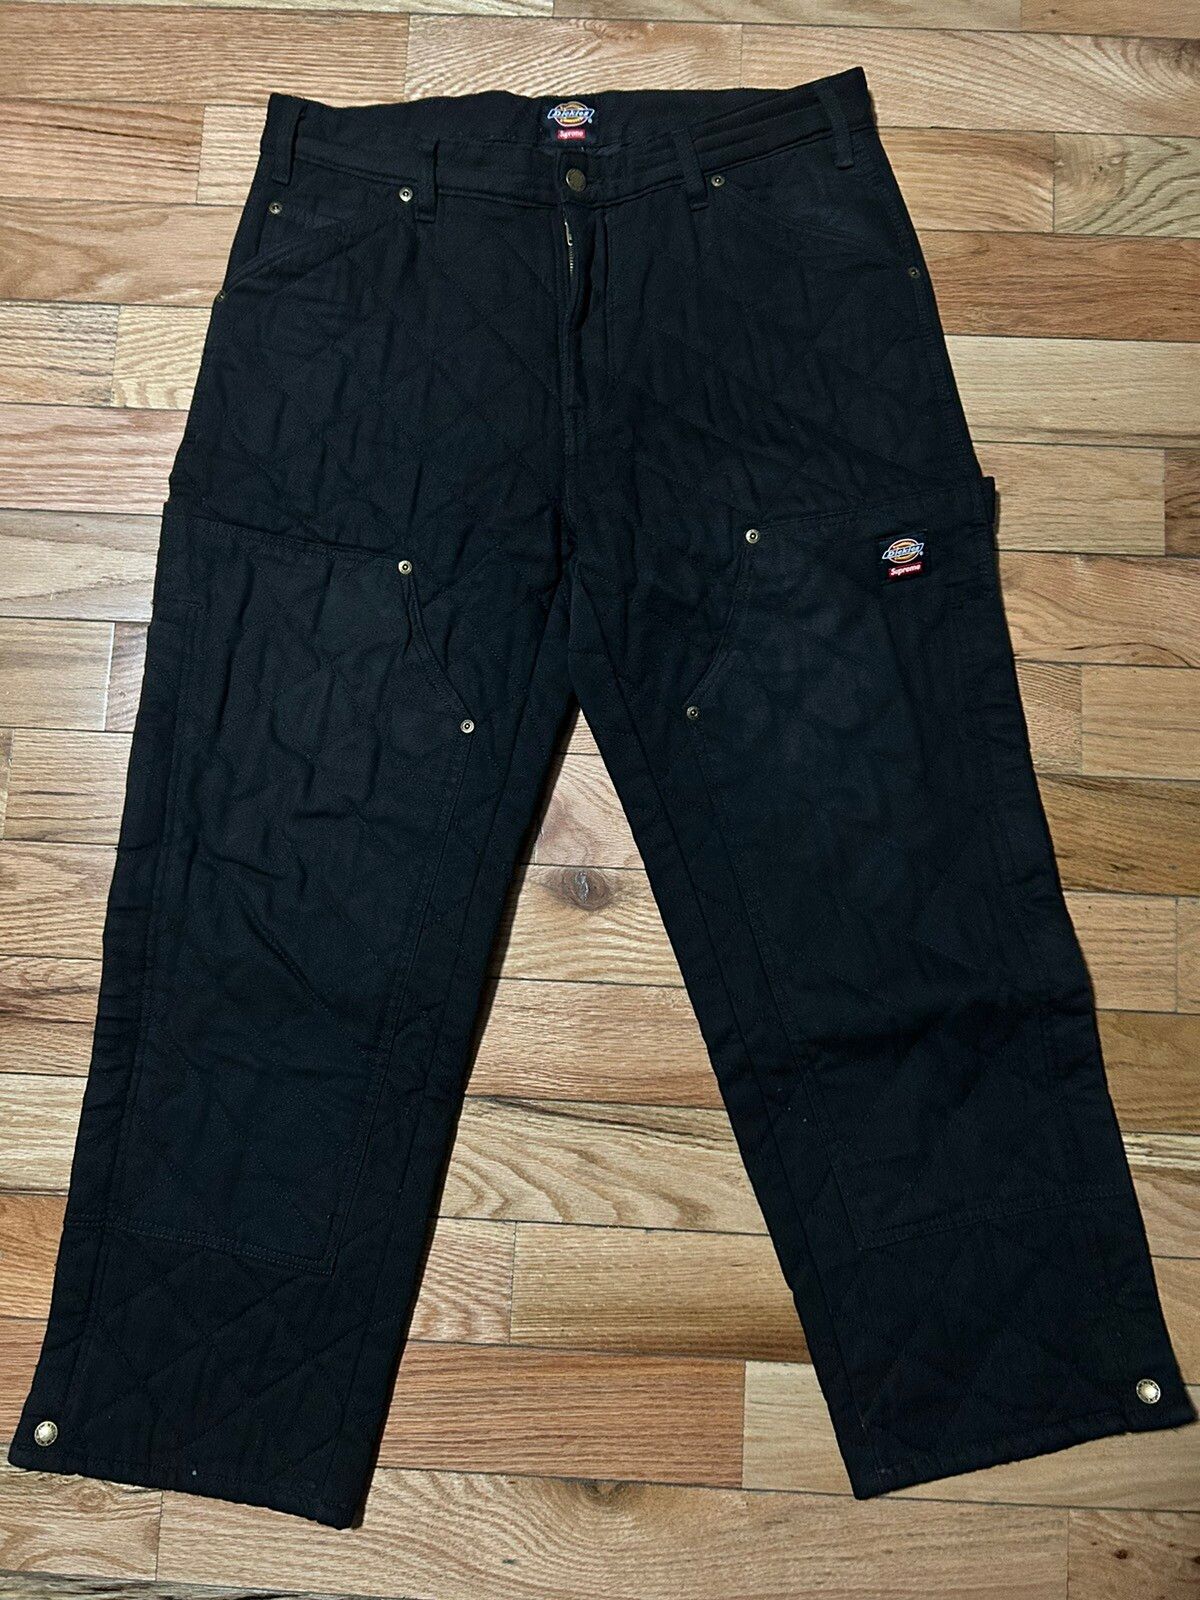 Supreme Supreme Dickies Quilted Double Knee Pants | Grailed